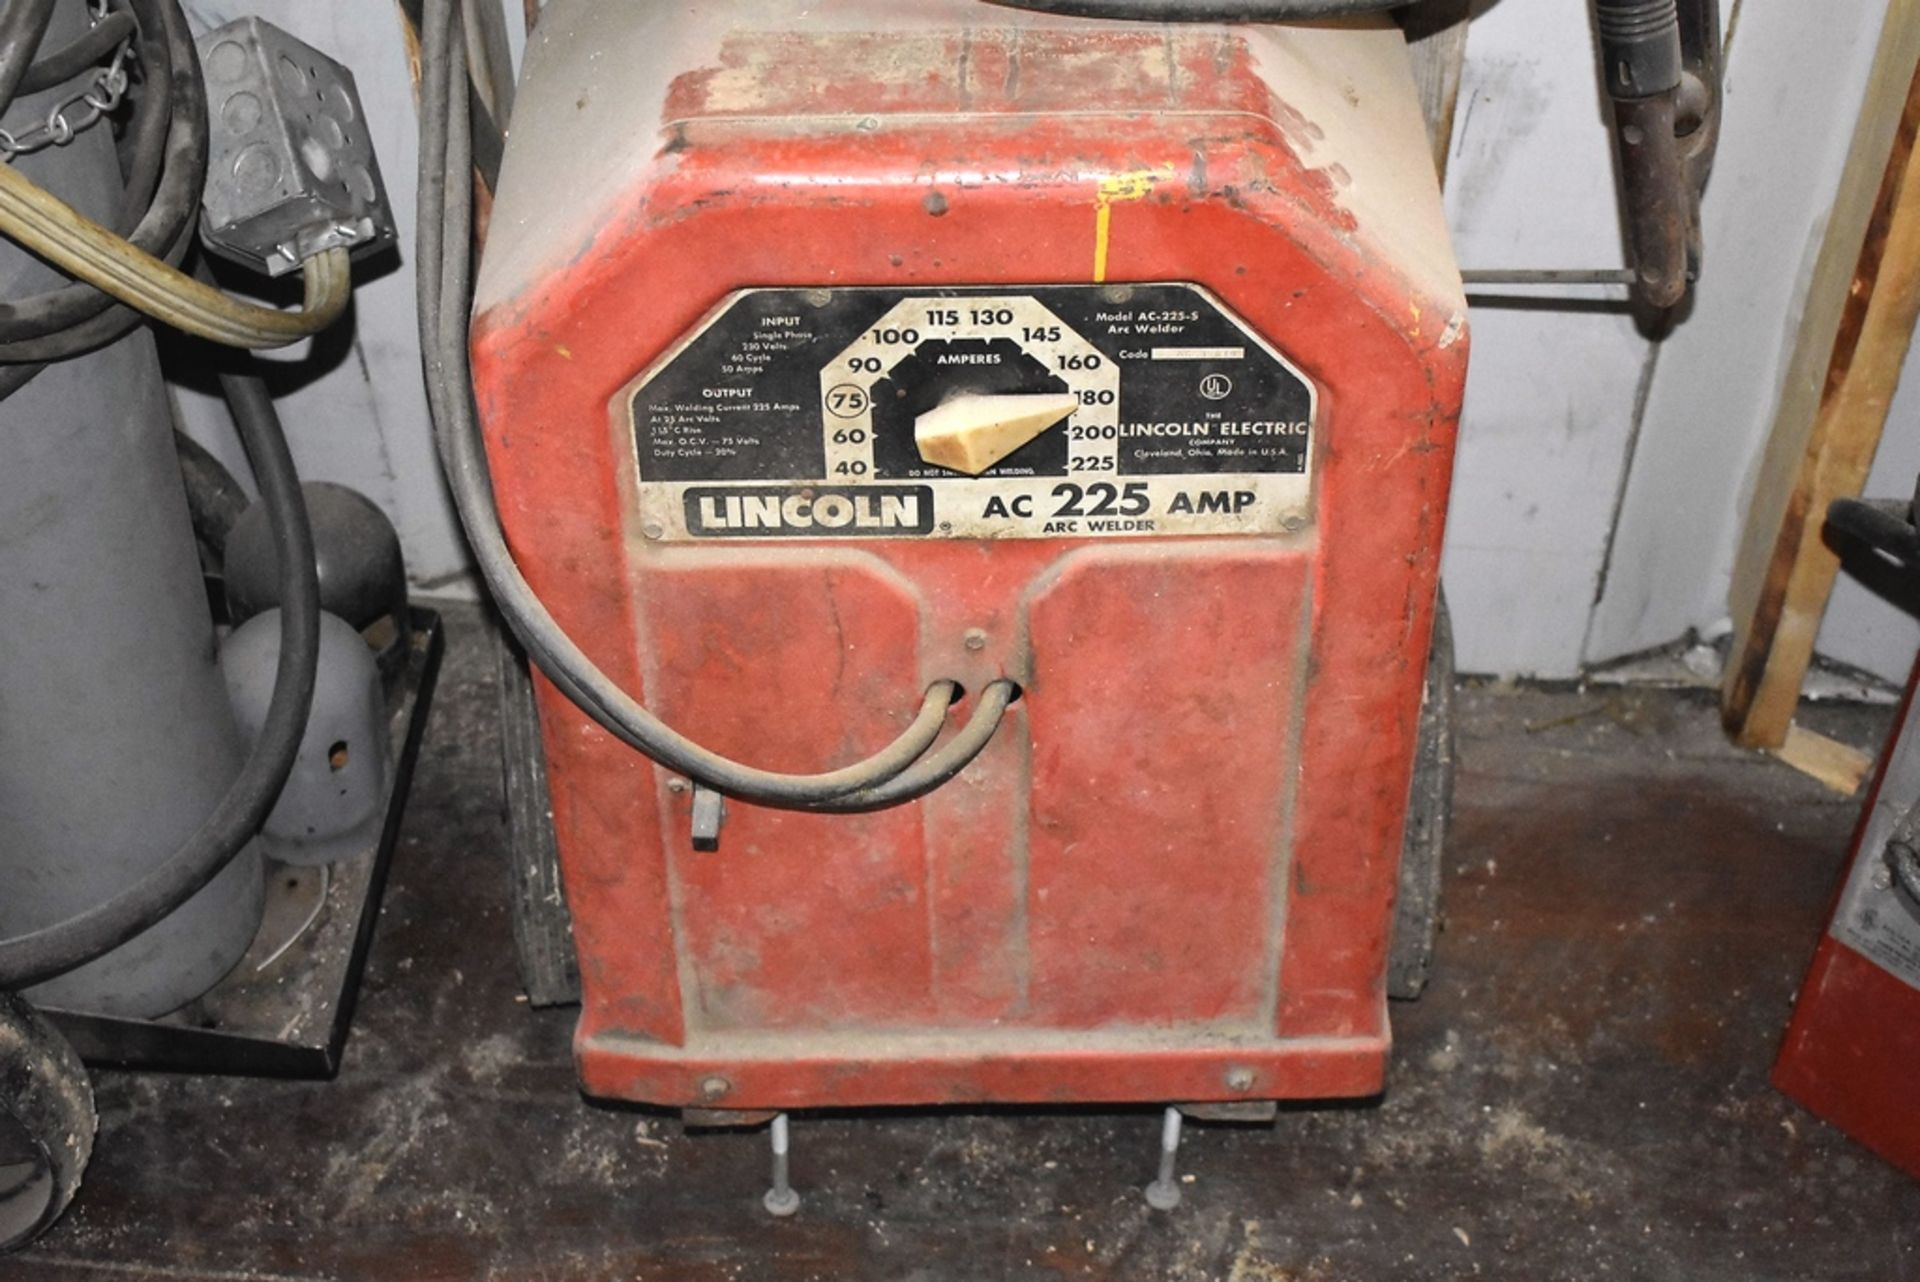 LINCOLN AC 225 AMP PORTABLE WELDER - Image 2 of 2